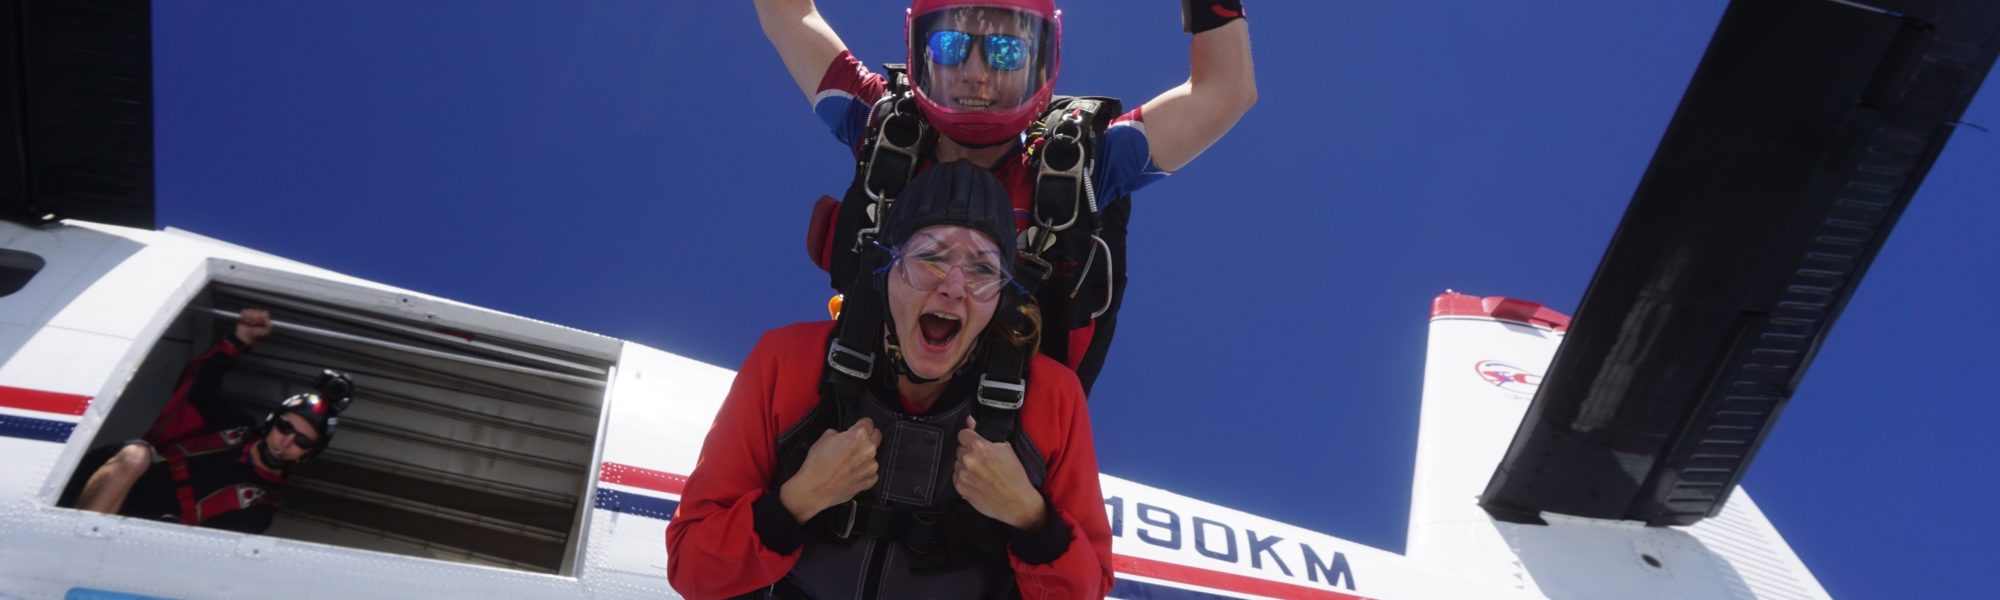 first time skydiving tips why you should spend money on experiences